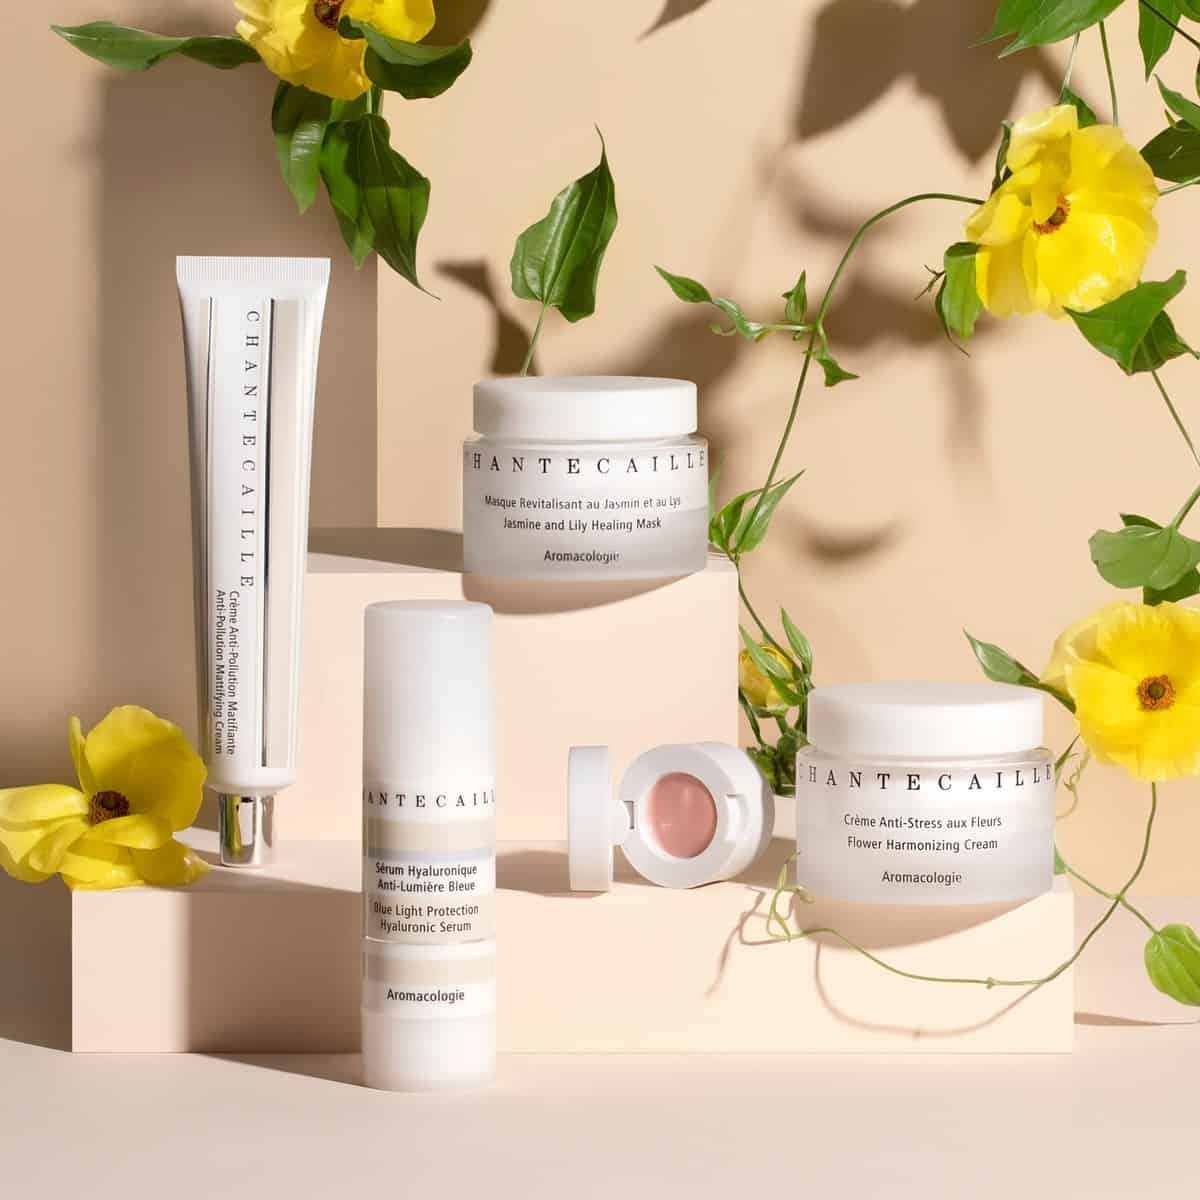 How to Choose the Right Skincare Brand